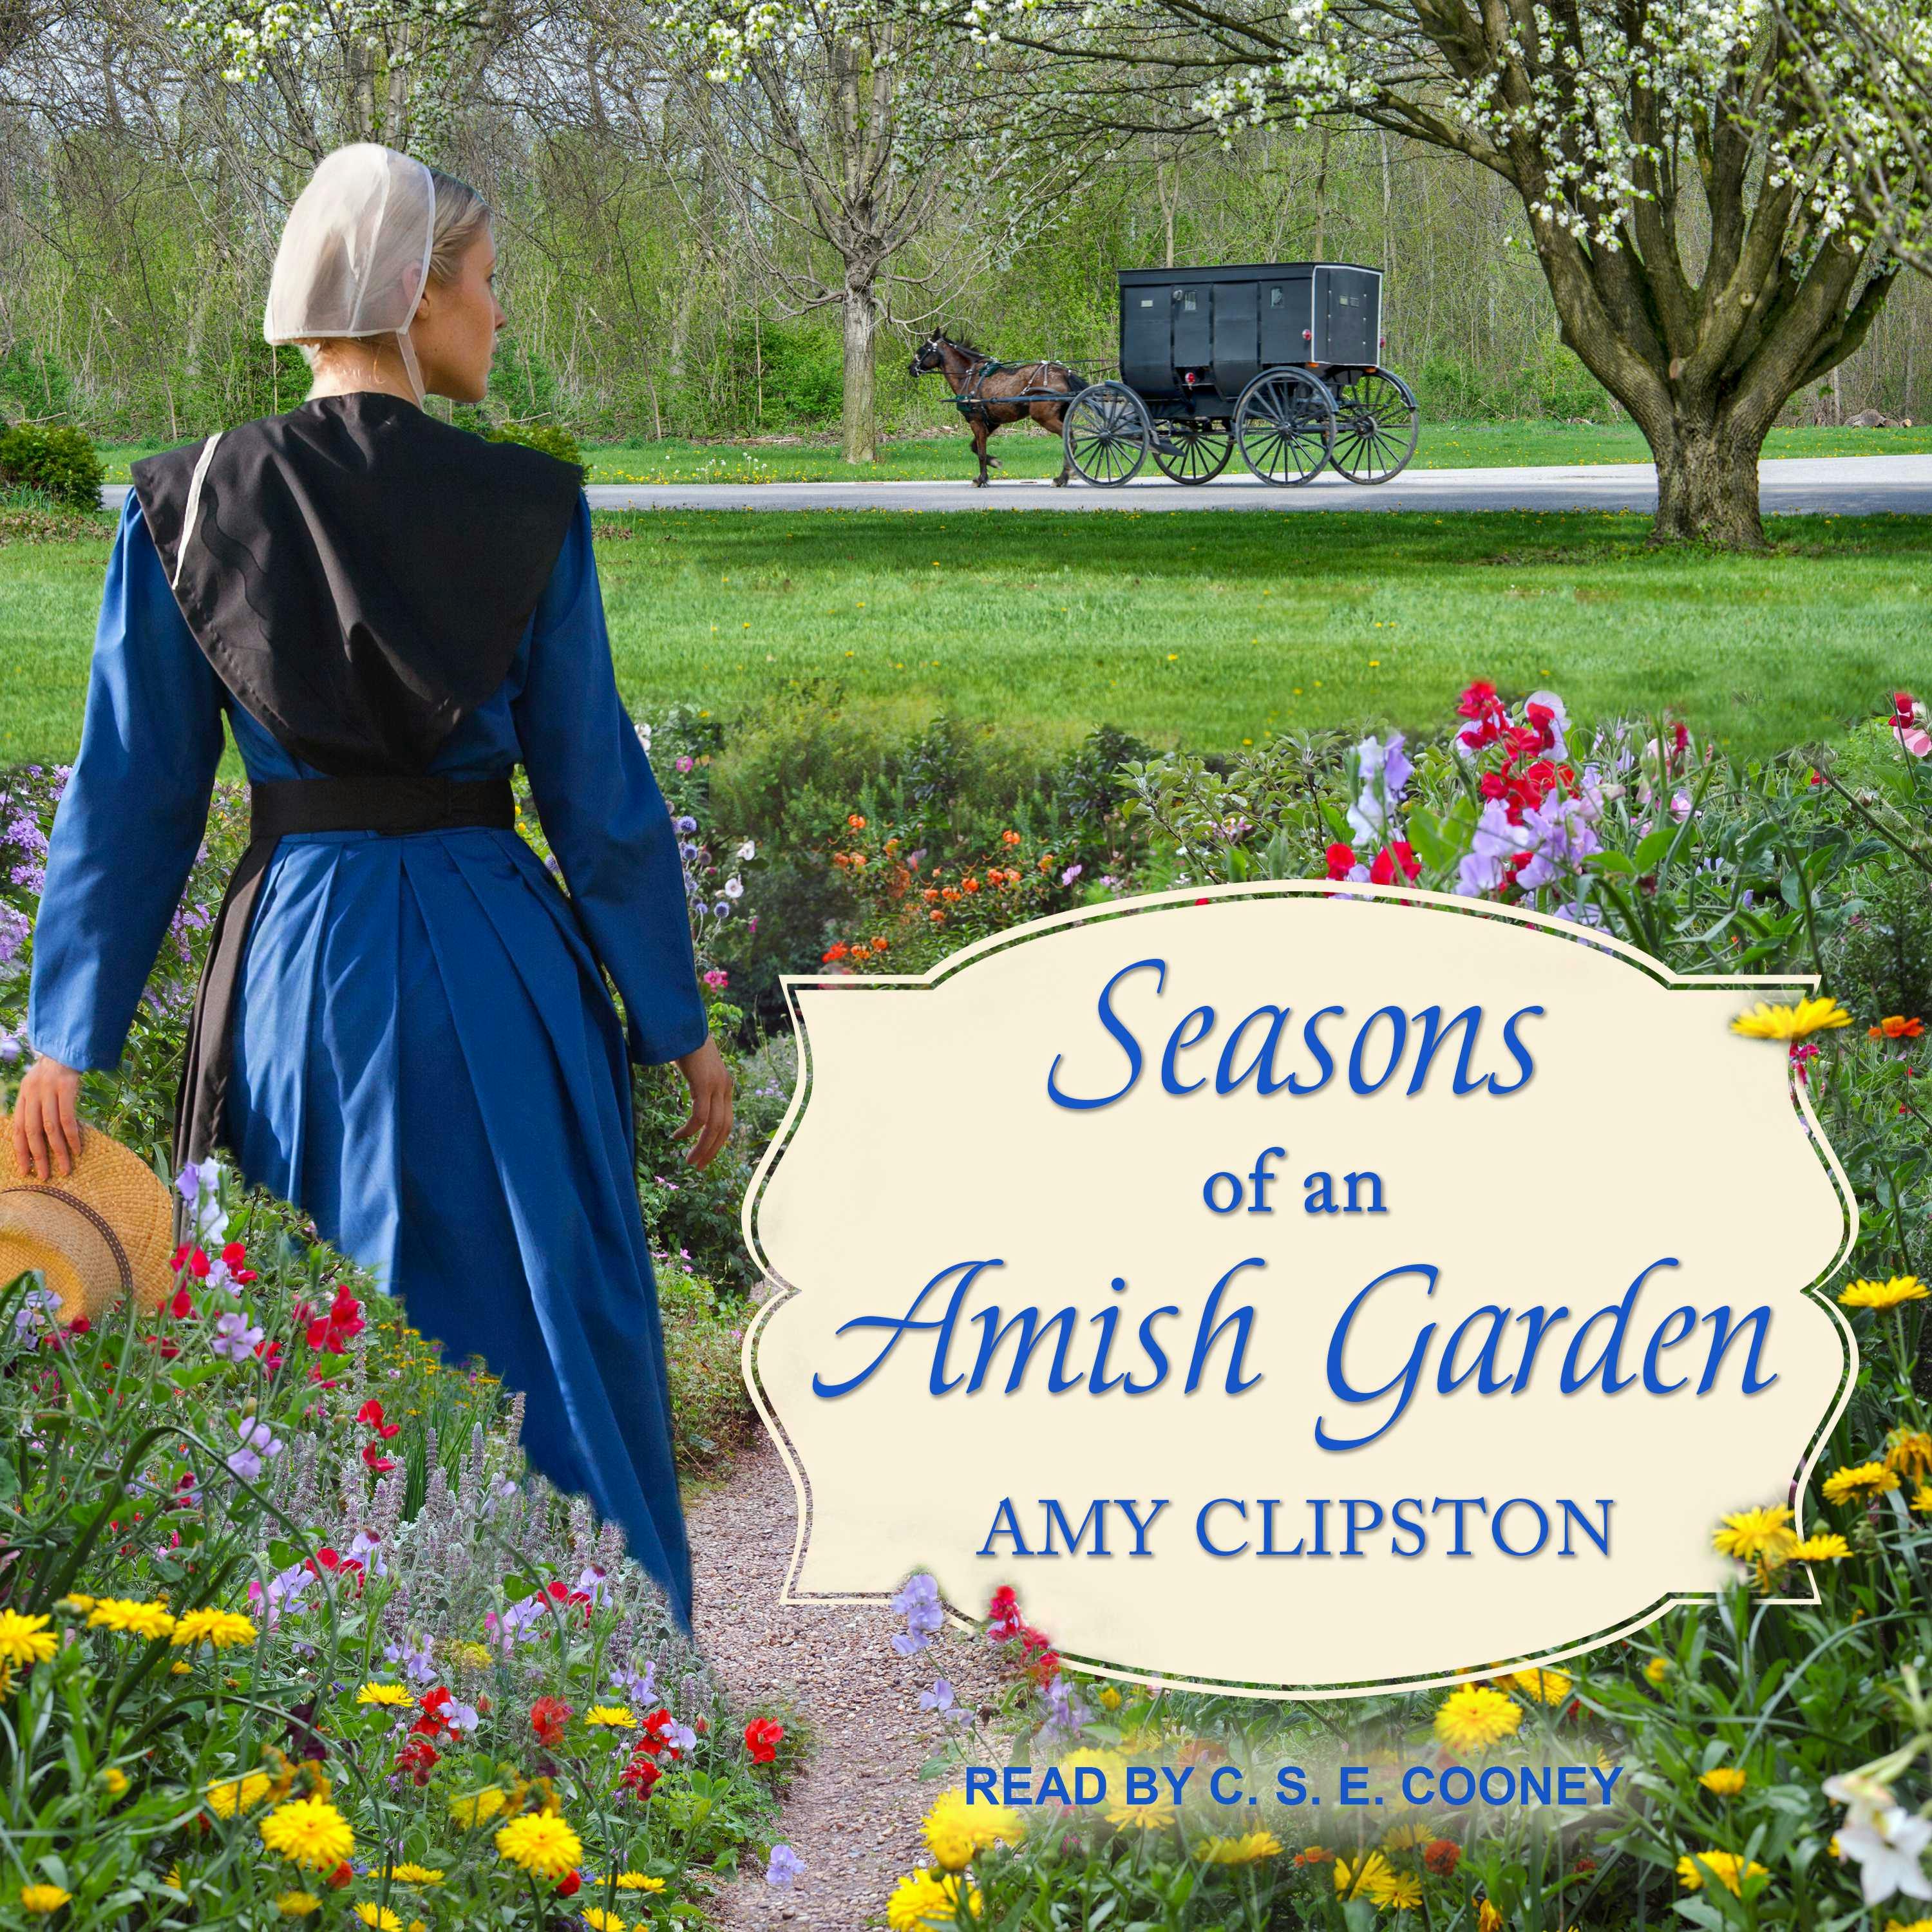 Seasons of an Amish Garden: Four Stories - Amy Clipston